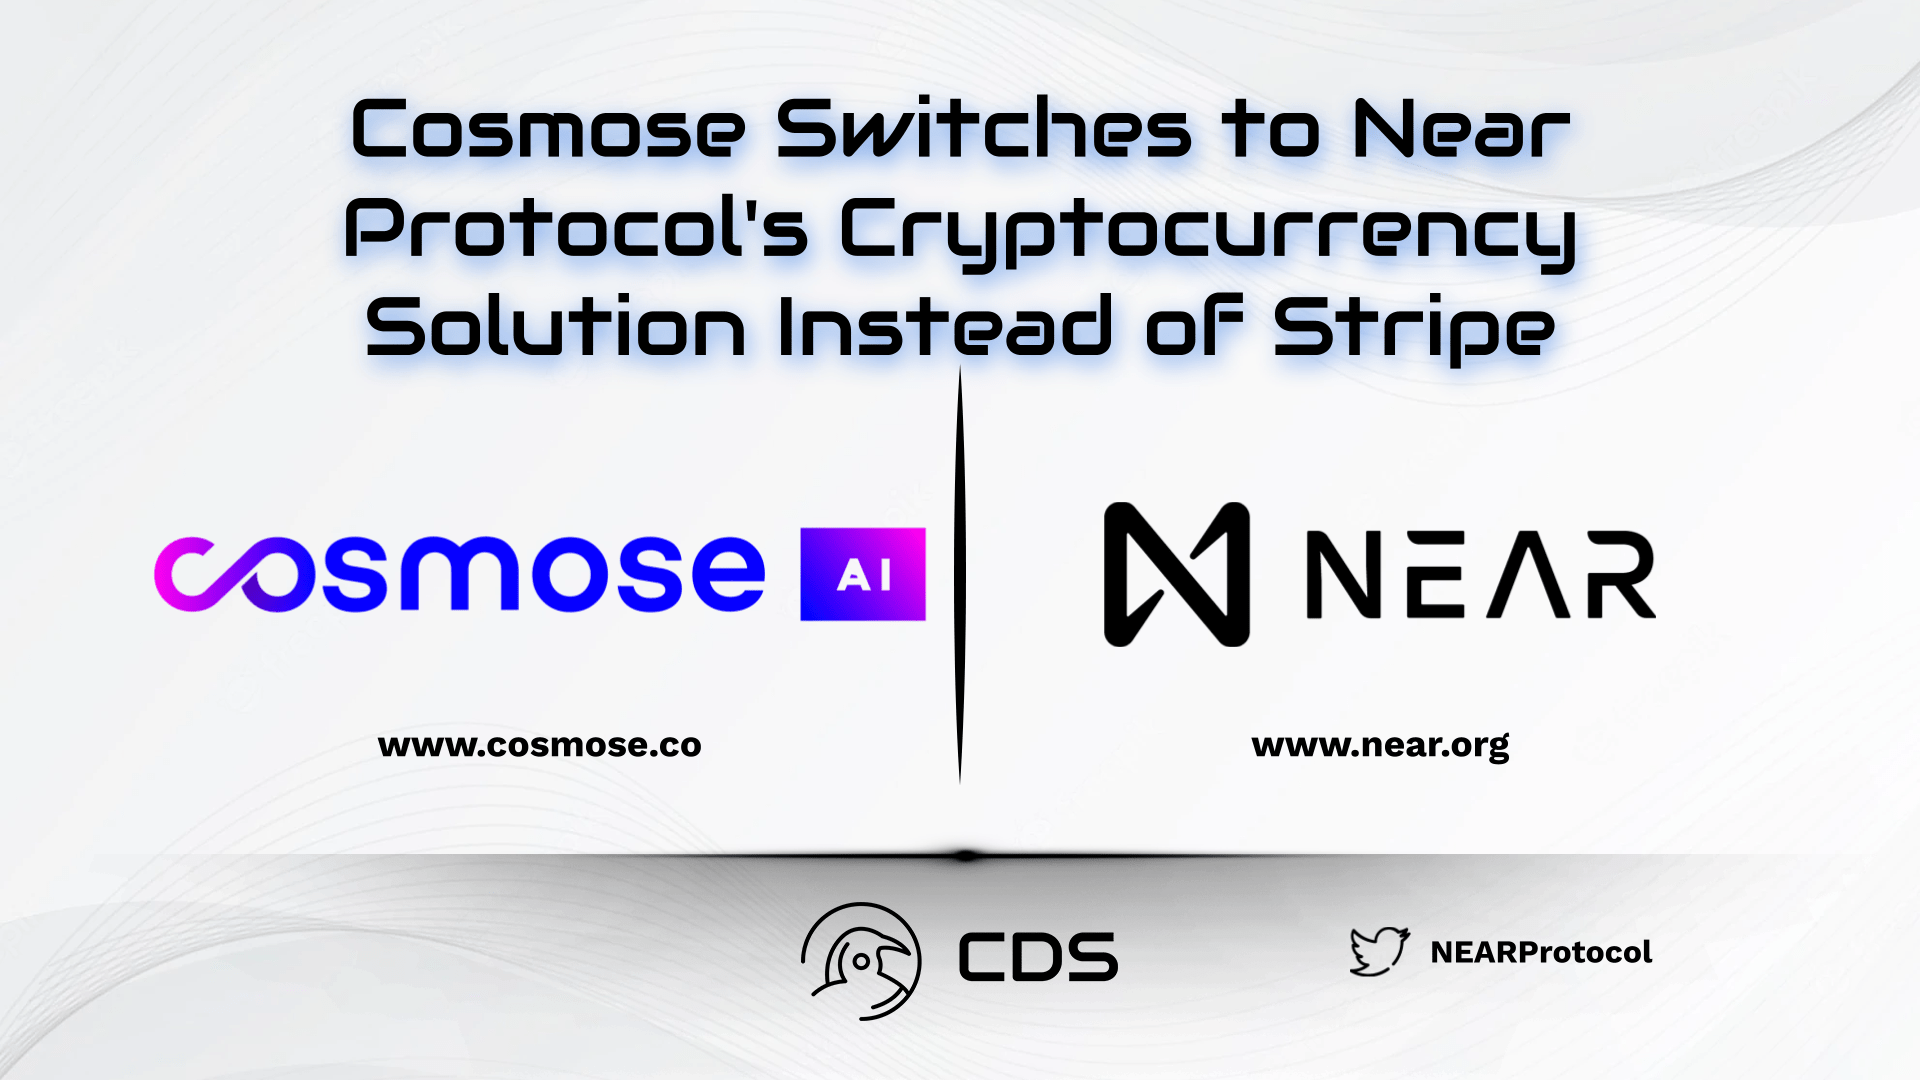 Cosmose Switches to Near Protocol's Cryptocurrency Solution Instead of Stripe